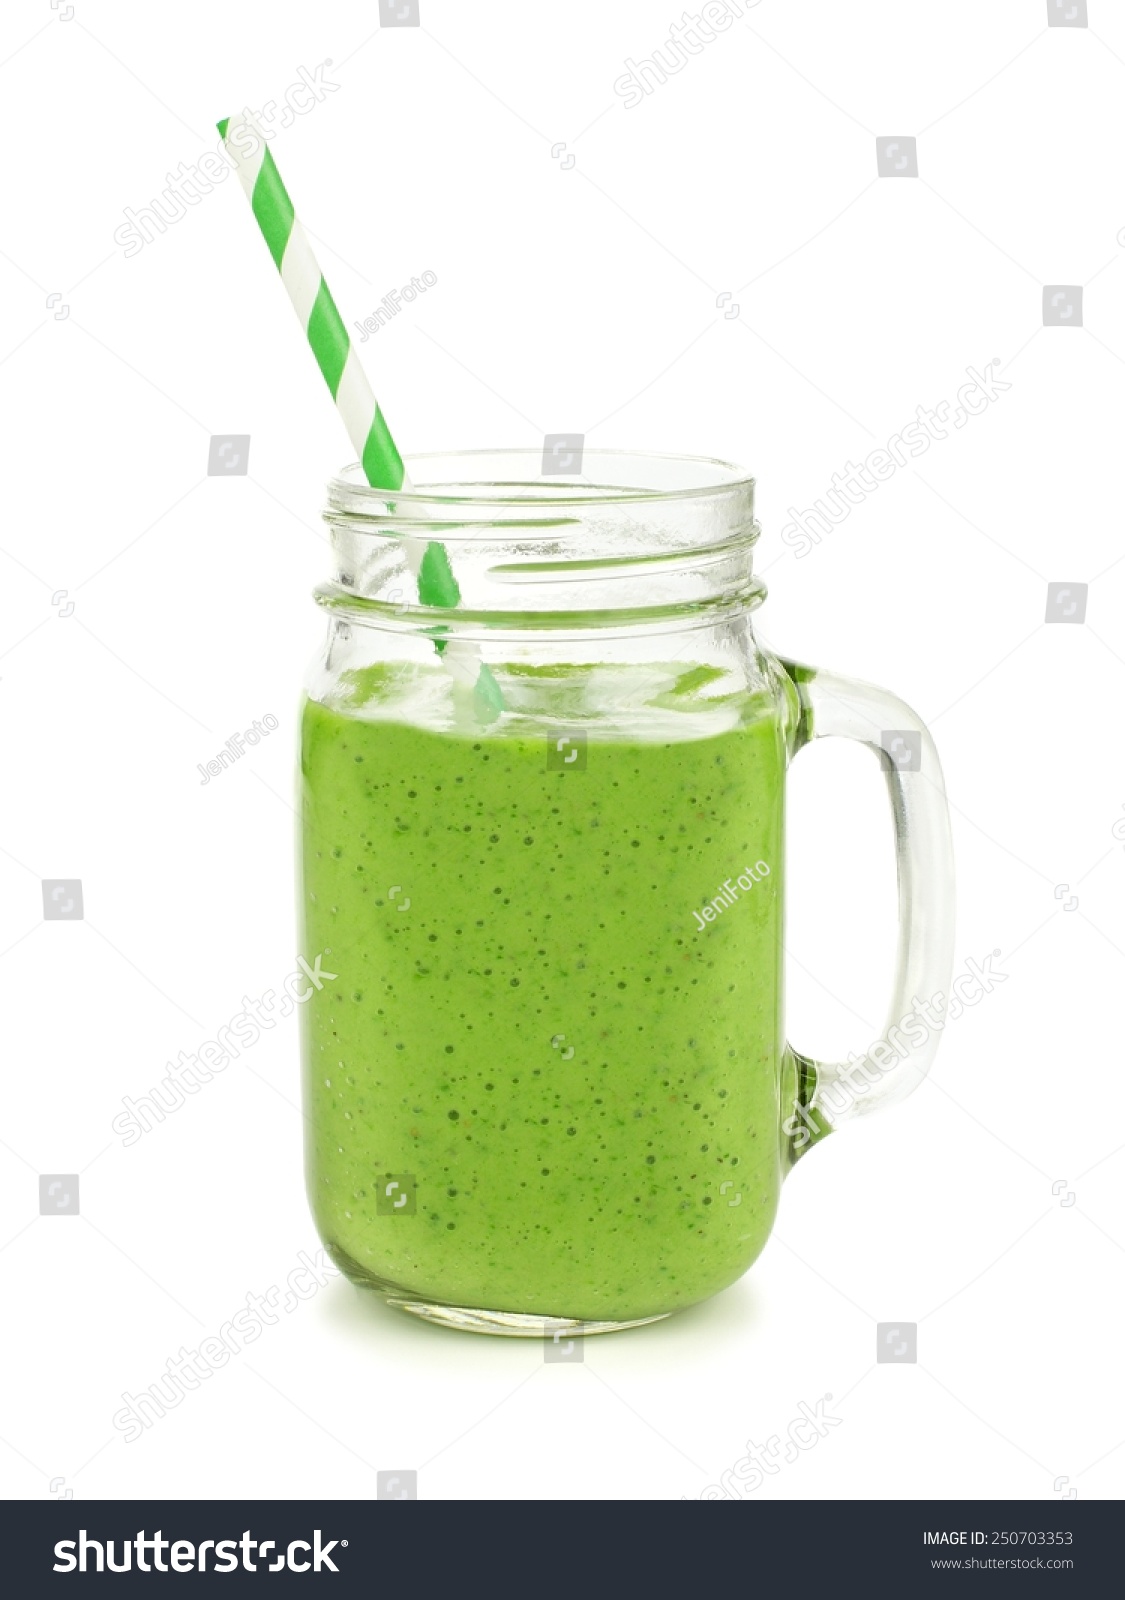 Healthy green smoothie with straw in a jar mug isolated on white #250703353